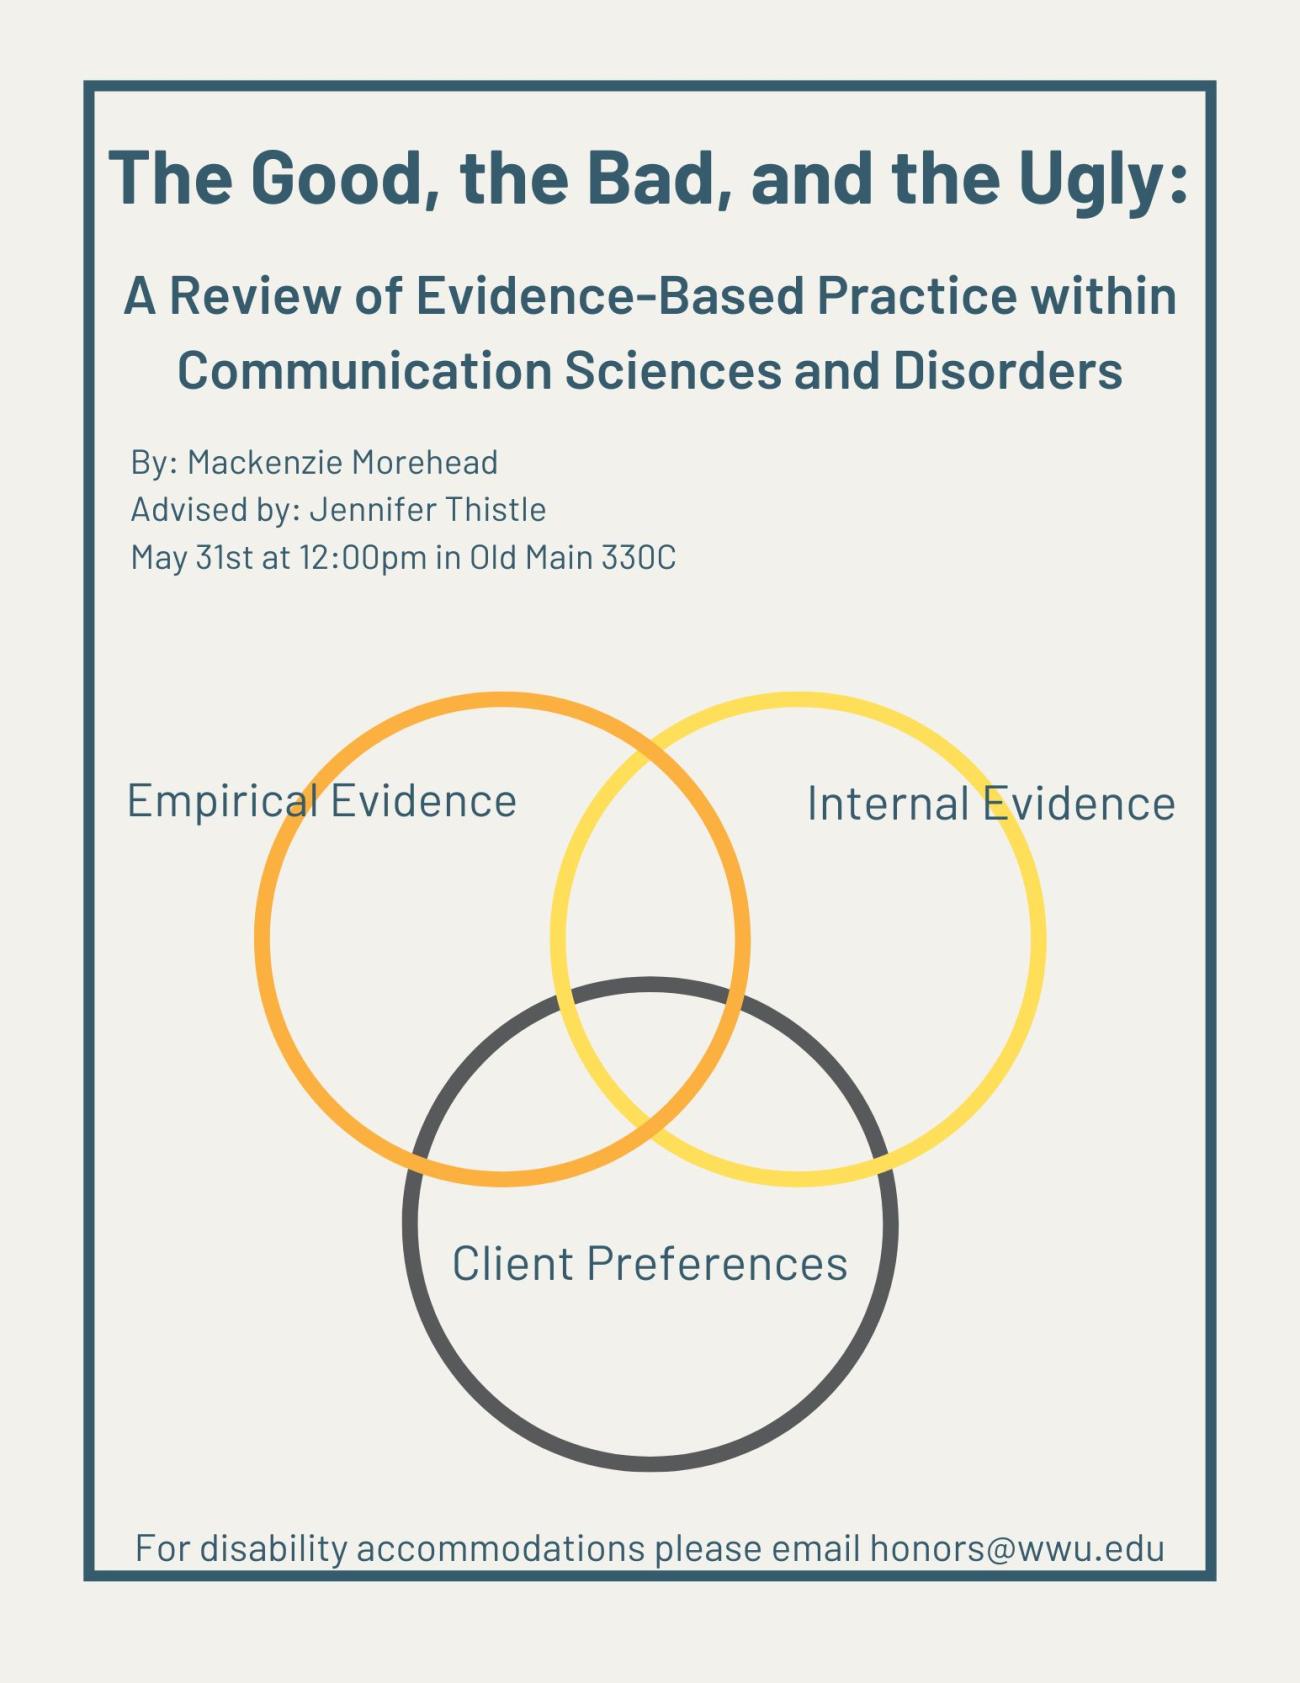 Beige background with a teal border. Inside three colored interlocking circles label with "empirical evidence", "internal evidence", and "client preferences".  Text reads "The Good, the Bad, and the Ugly: A Review of Evidence Based Practice within Communication Sciences and Disorders. By: Mackenzie Morehead. Advised by: Jennifer Thistle. May 31st at 12:00pm in Old Main 330C. For disability accommodations please email honors@wwu.edu"